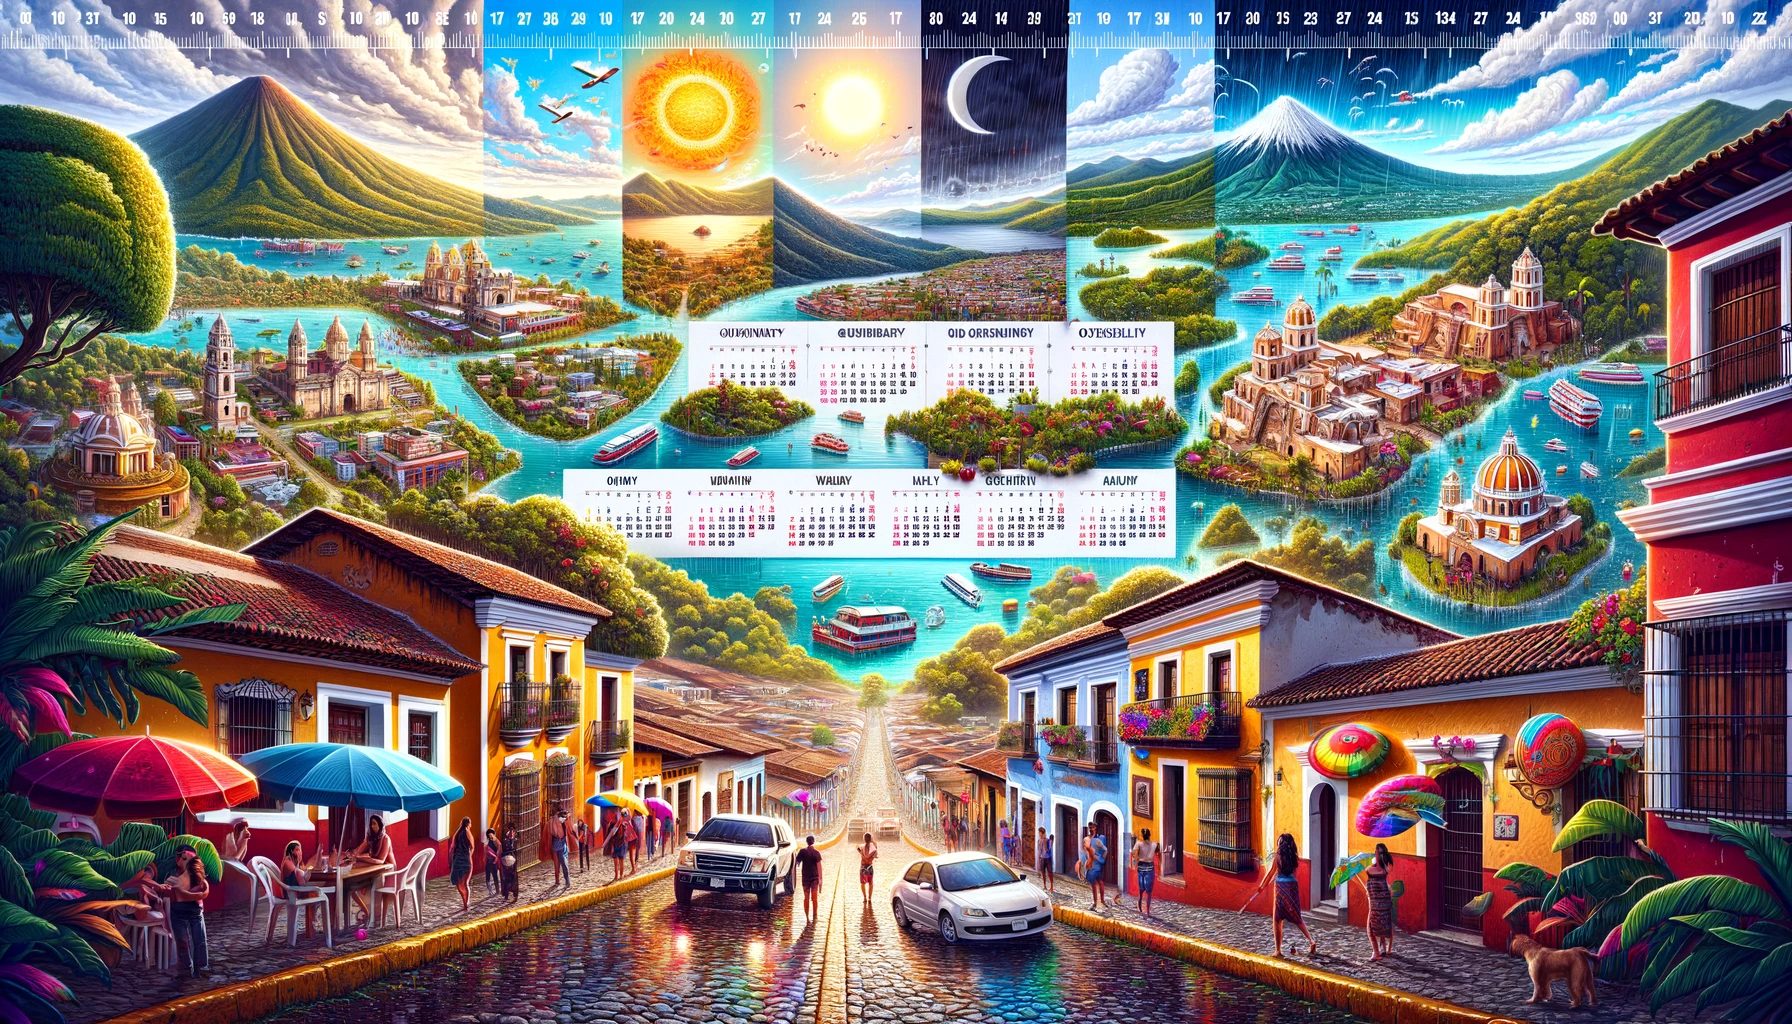 Colorful illustration of a vibrant town and seasonal landscapes.